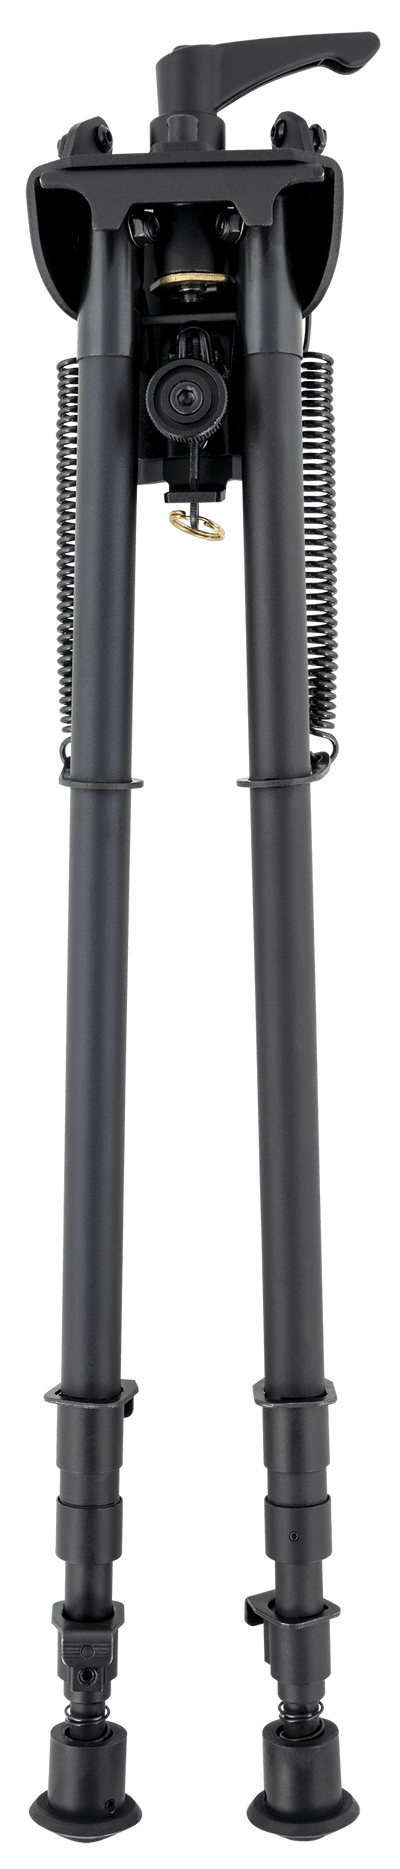 Truglo Truglo Tac-pod 14-29" Pivoting - With Picatinny Rail Adapter Bipods